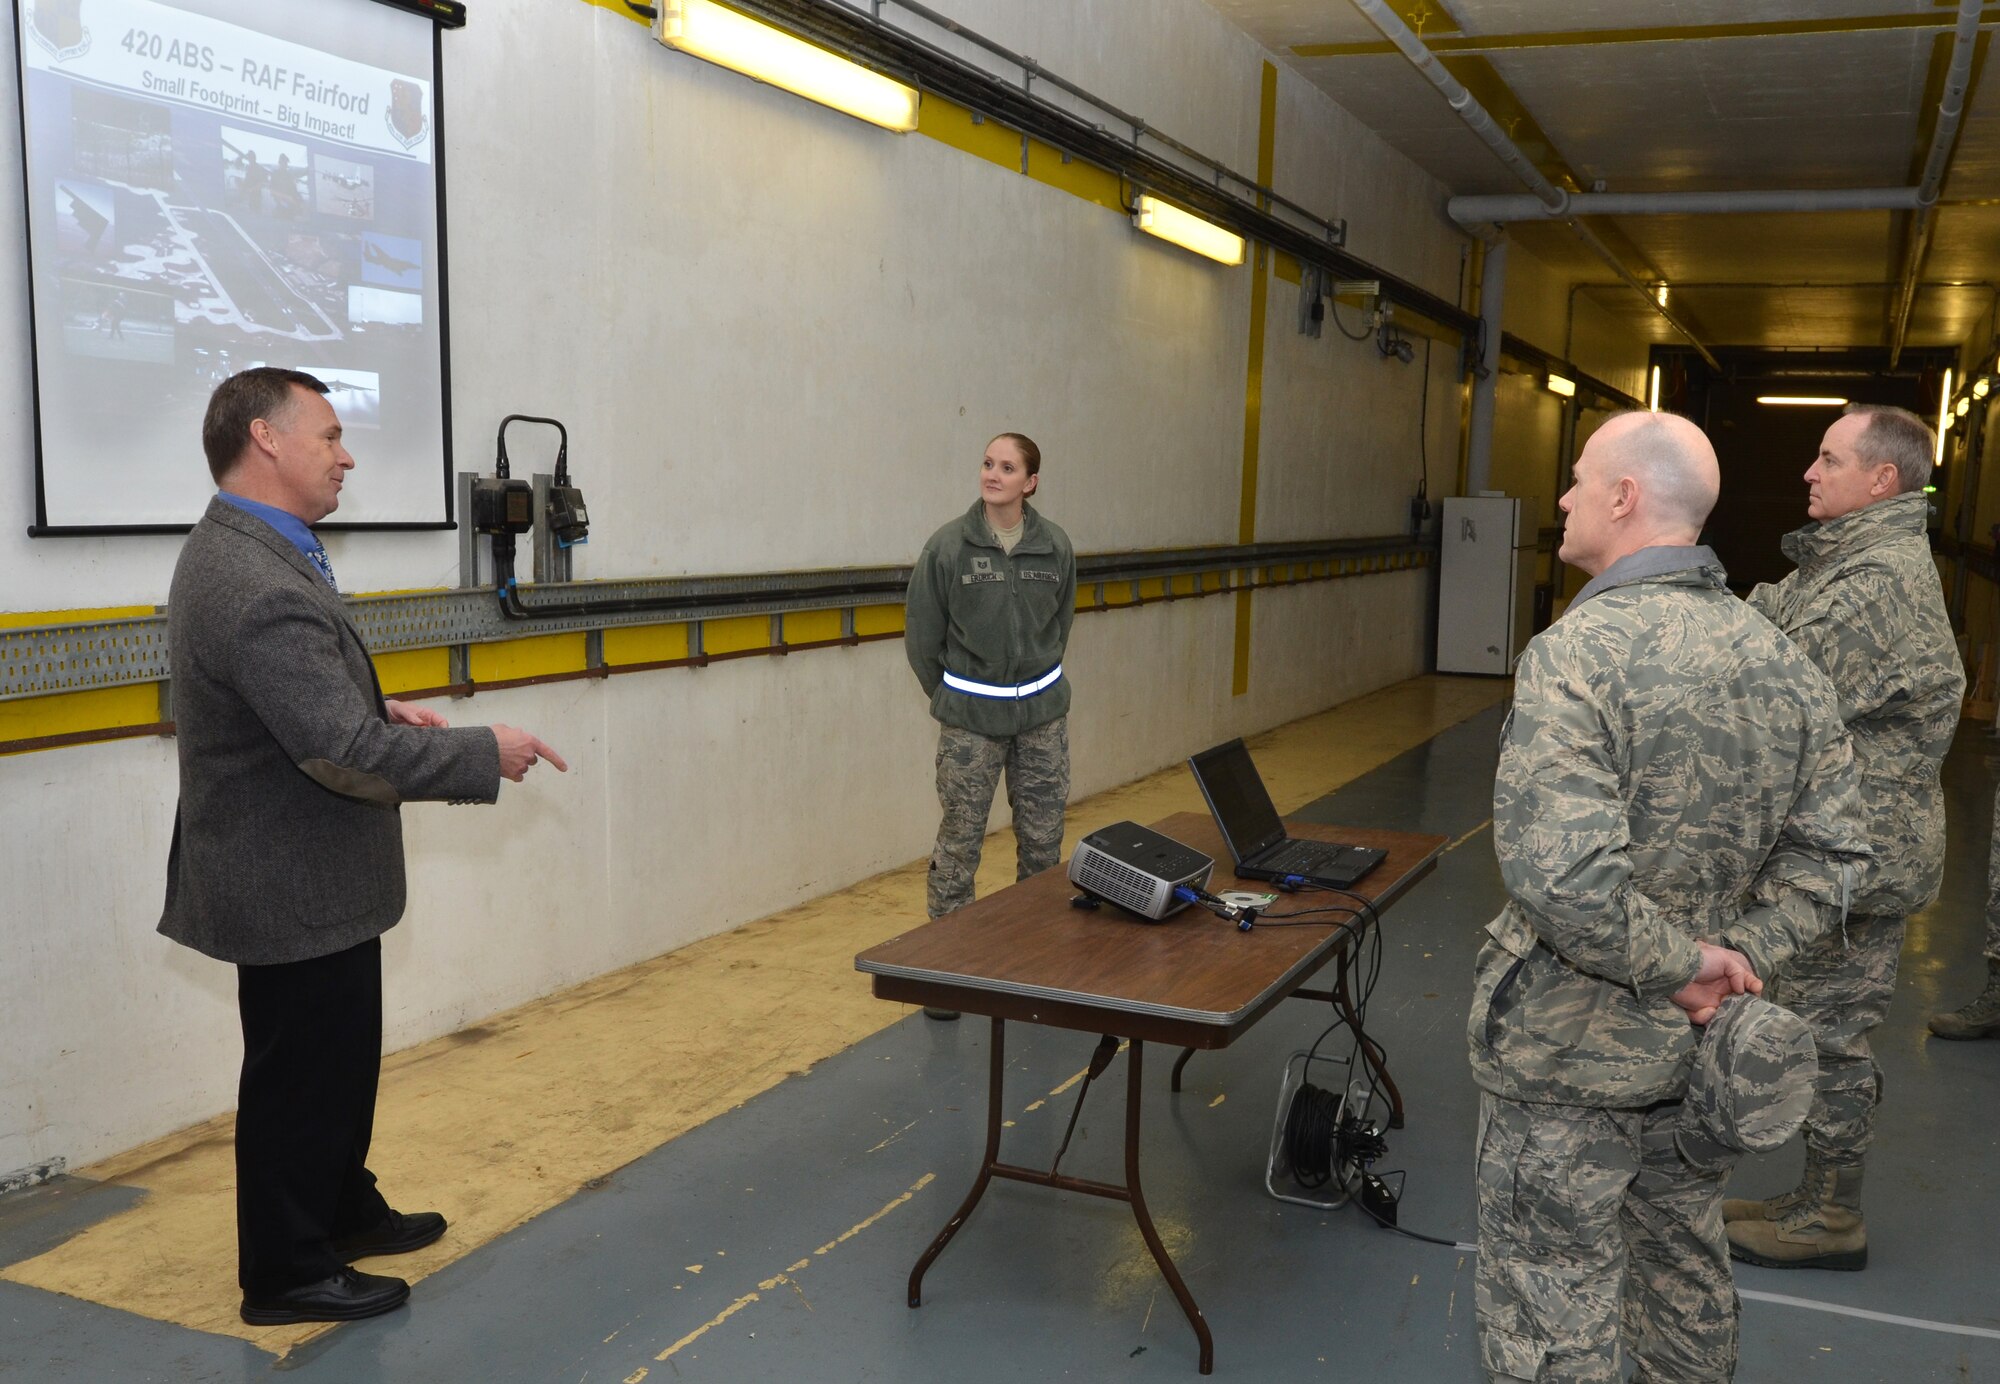 RAF MOLESWORTH, United Kingdom -- Timothy Hershberger (left), 420th Air Base Squadron site director, explains to Gen. Mark A. Welsh III, U.S. Air Forces in Europe commander, and Chief Master Sgt. David Williamson, USAFE command chief, Royal Air Force Fairford’s capabilities to host global strike operations during a briefing, here, Jan. 20. (U.S. Air Force Photo by Tech. Sgt. John Barton)